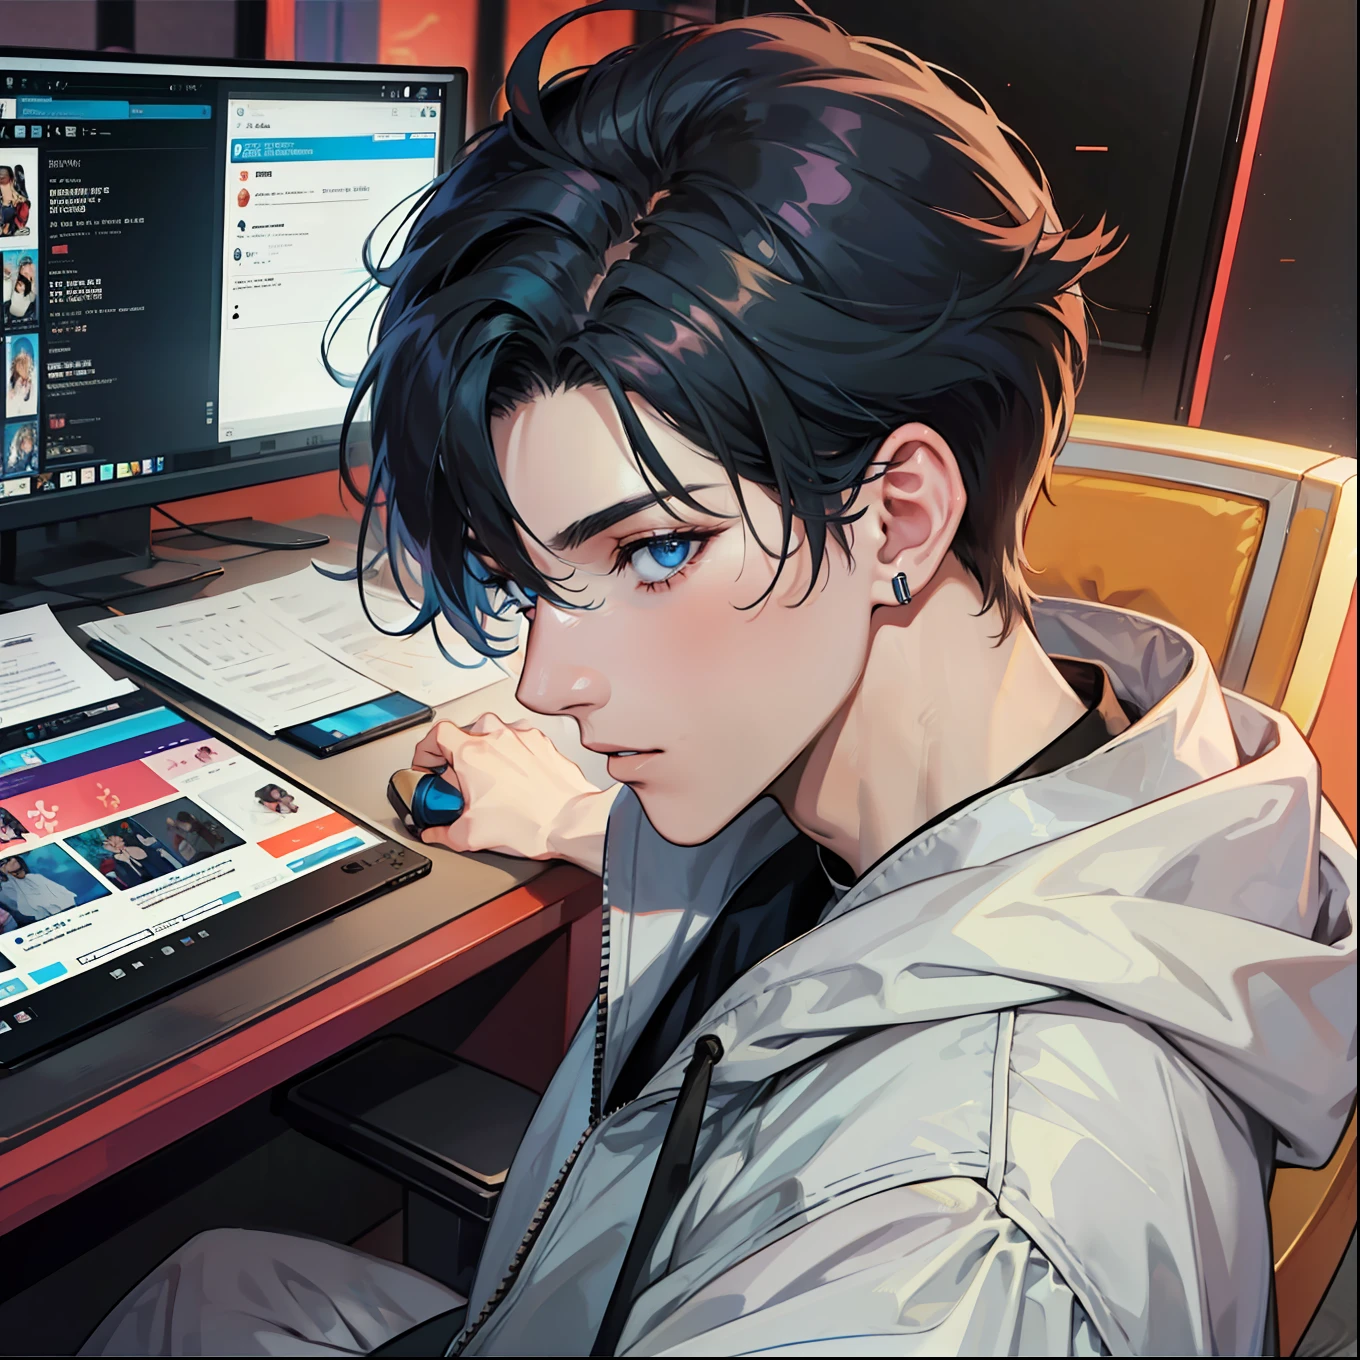 Anime boy calls to talk, ig studios anime style, nightcore, style of anime4 K, High quality anime art style, Anime boy, young anime man, Anime art style, Digital anime illustration, Anime style. 8K, in an anime style, male anime character, Like，best qualtiy：1.0），（Ultra-high resolution：1.0），Anime boys，with short black hair，blue color eyes，sitting in front of the computer，Speak into the microphone，The background is in the esports room，earphone，The head is close to the microphone,8K